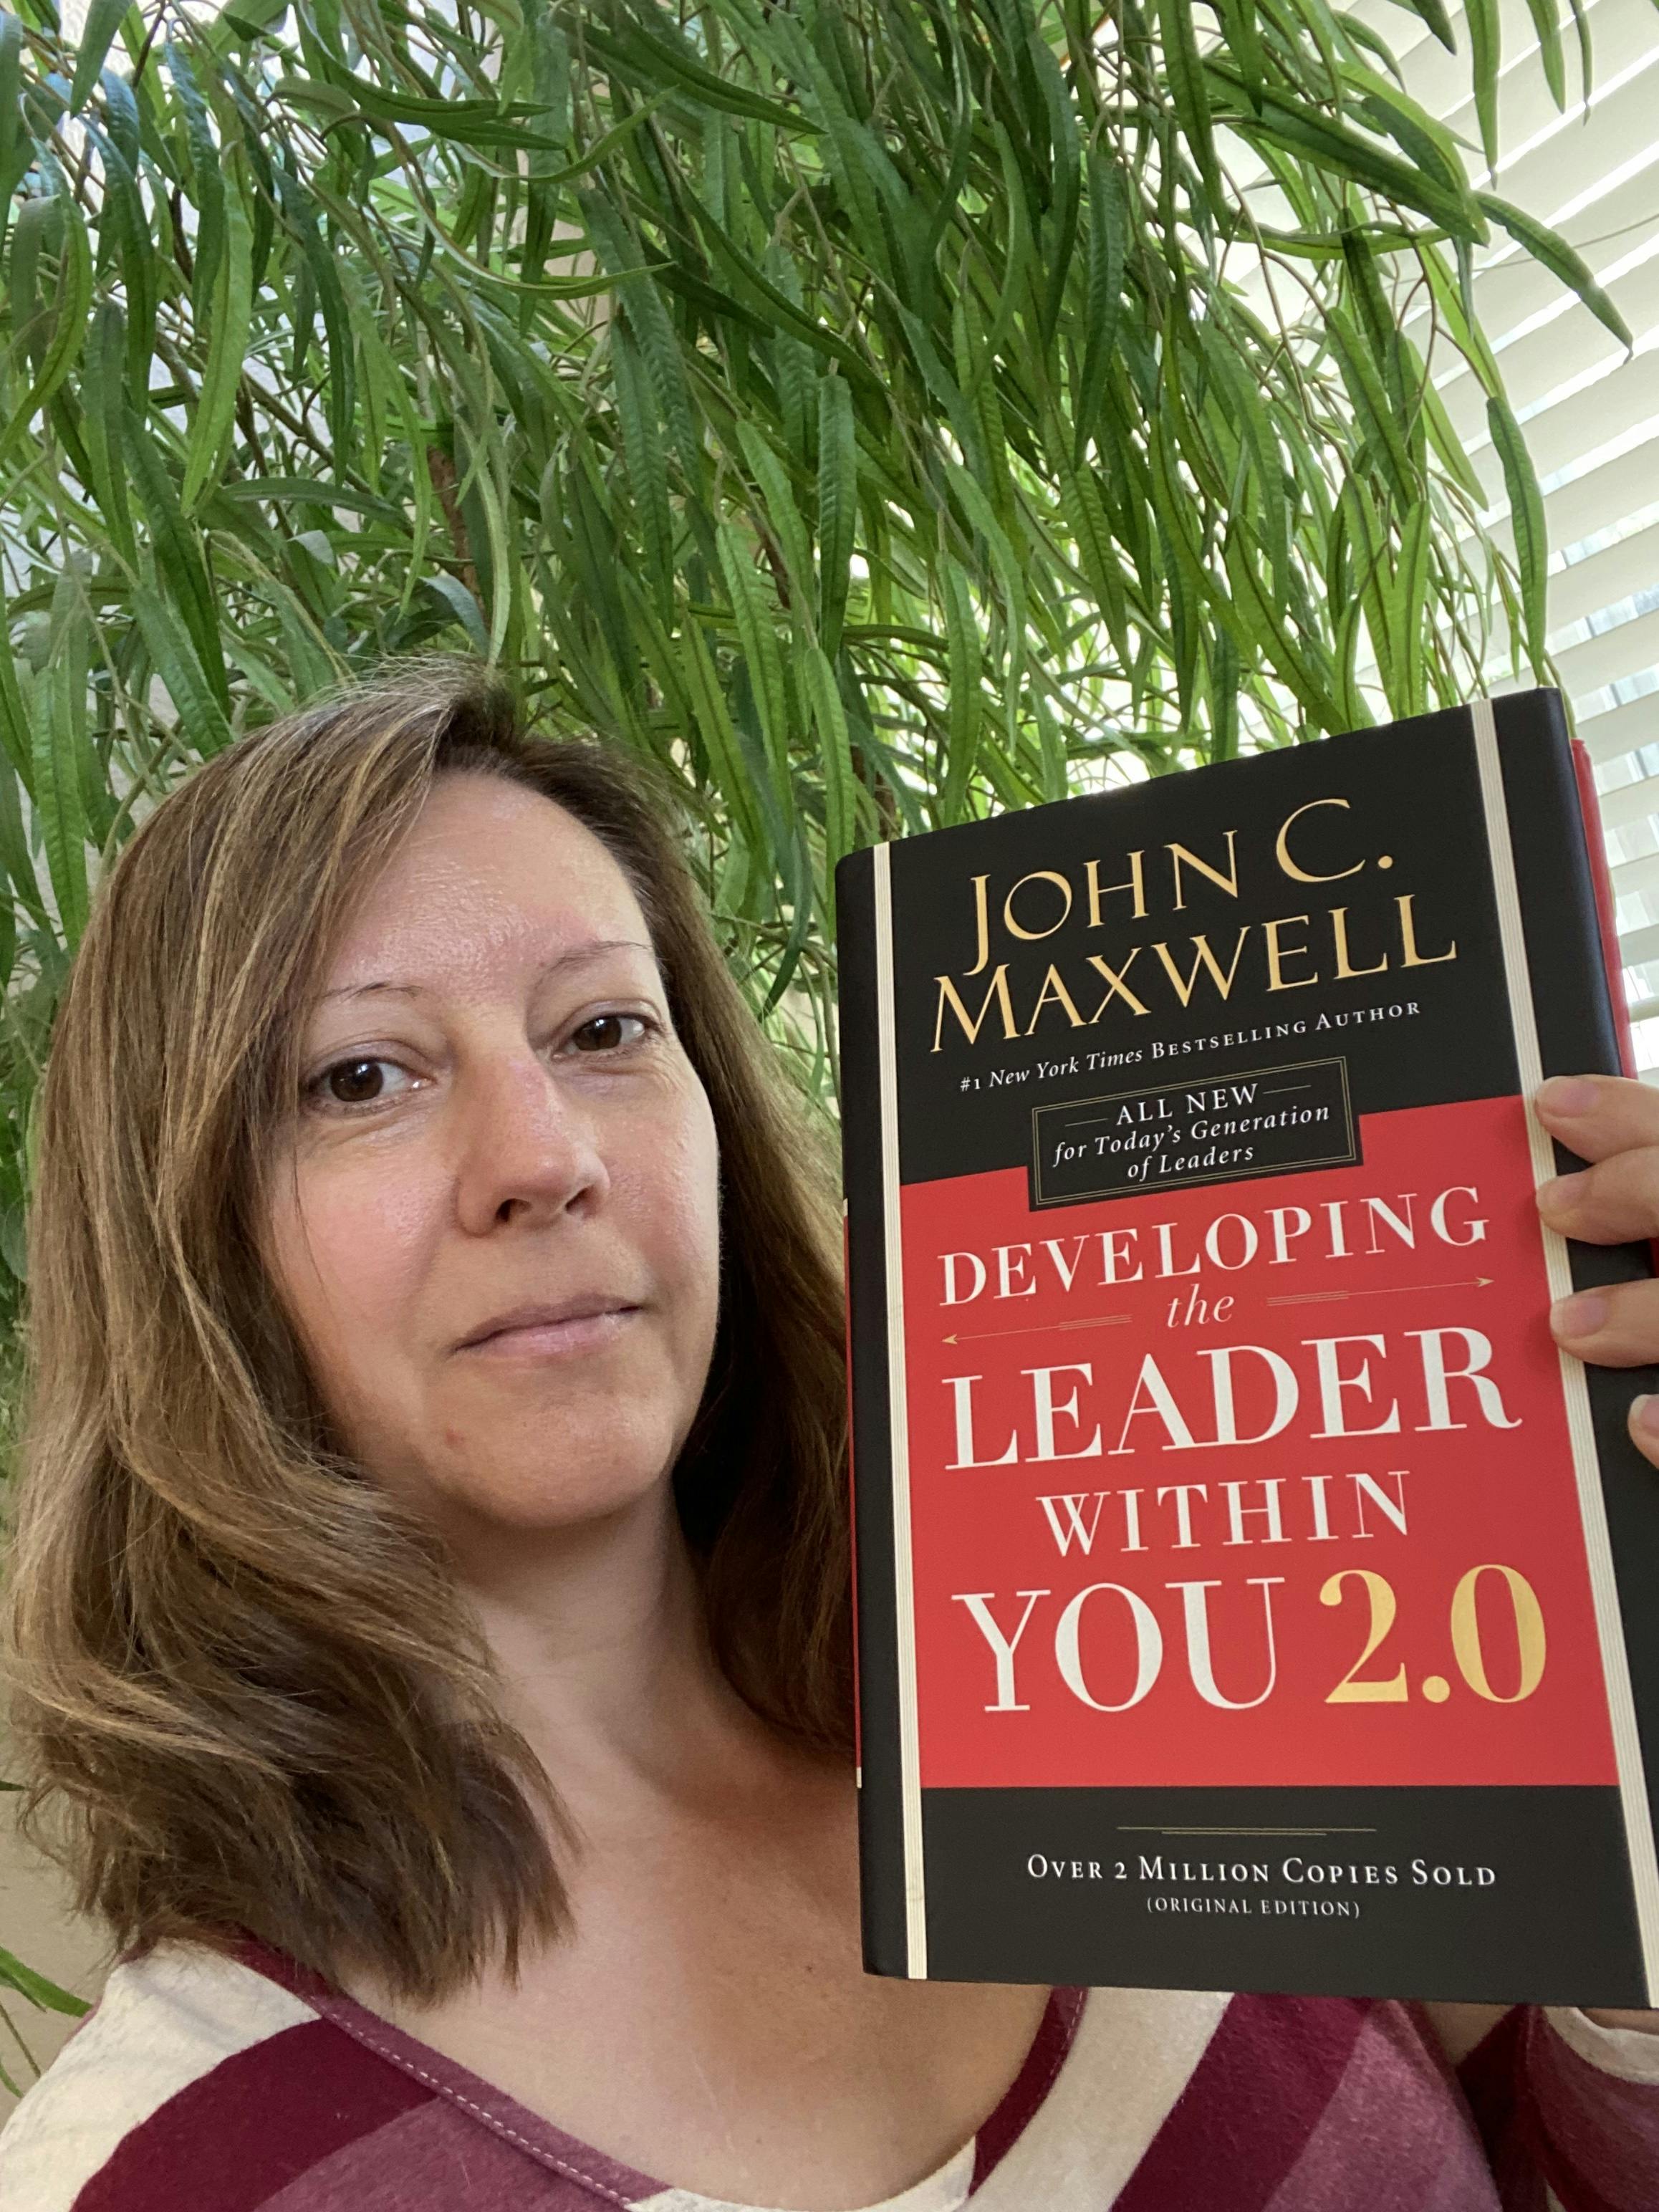 Stephanie holding the book "Developing the Leaders Within You 2.0" by John C. Maxwell. 